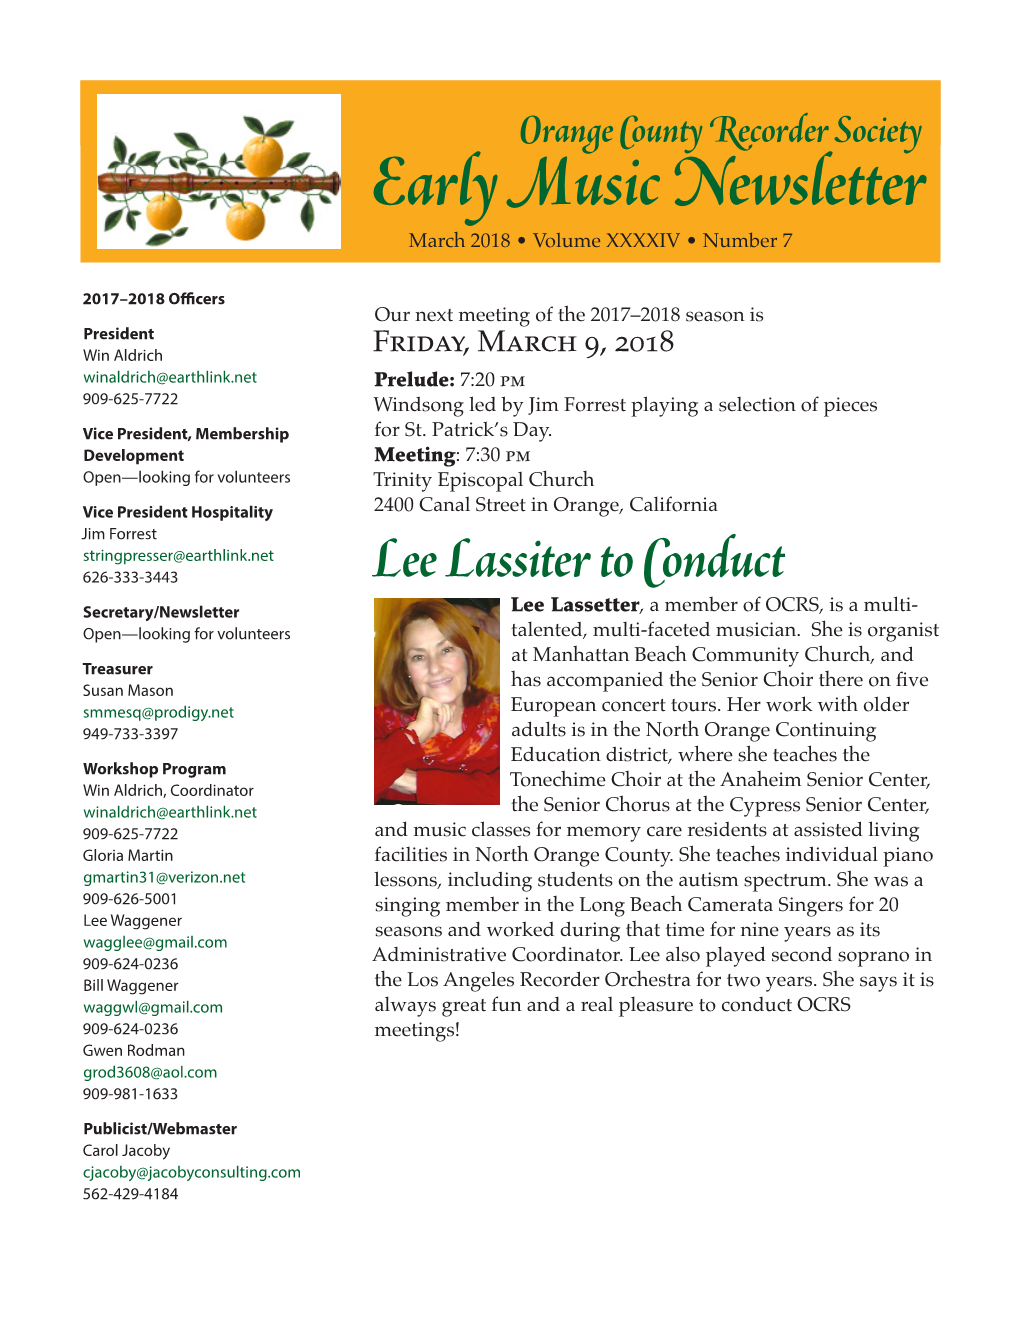 Lee Lassiter to Conduct Secretary/Newsletter Lee Lassetter, a Member of OCRS, Is a Multi- Open—Looking for Volunteers Talented, Multi-Faceted Musician